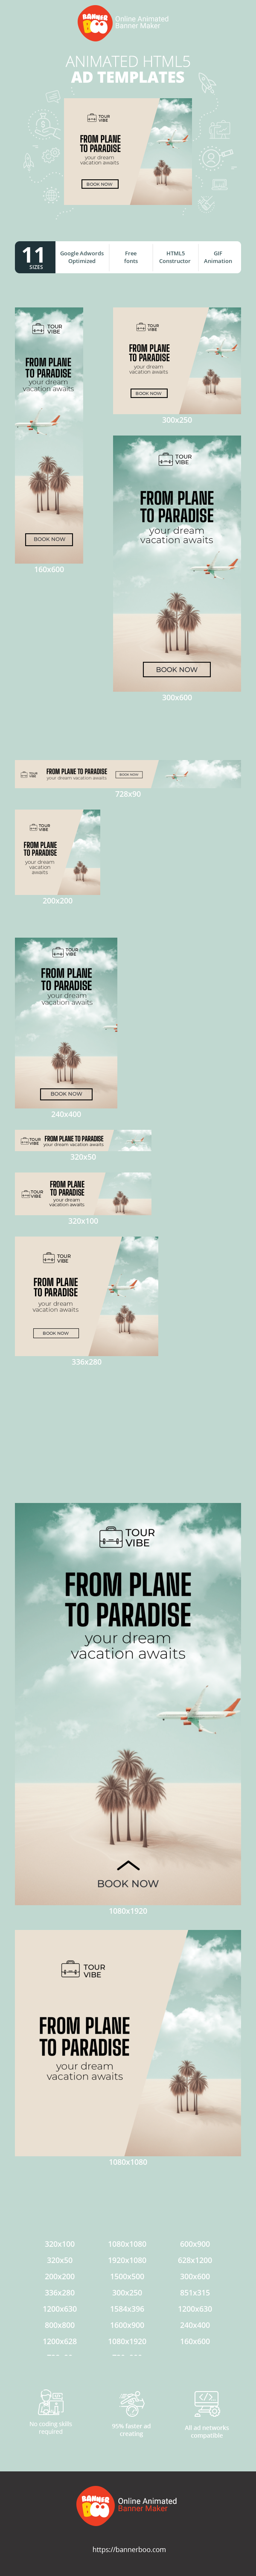 Banner ad template — From Plane To Paradise — Your Dream Vacation Awaits